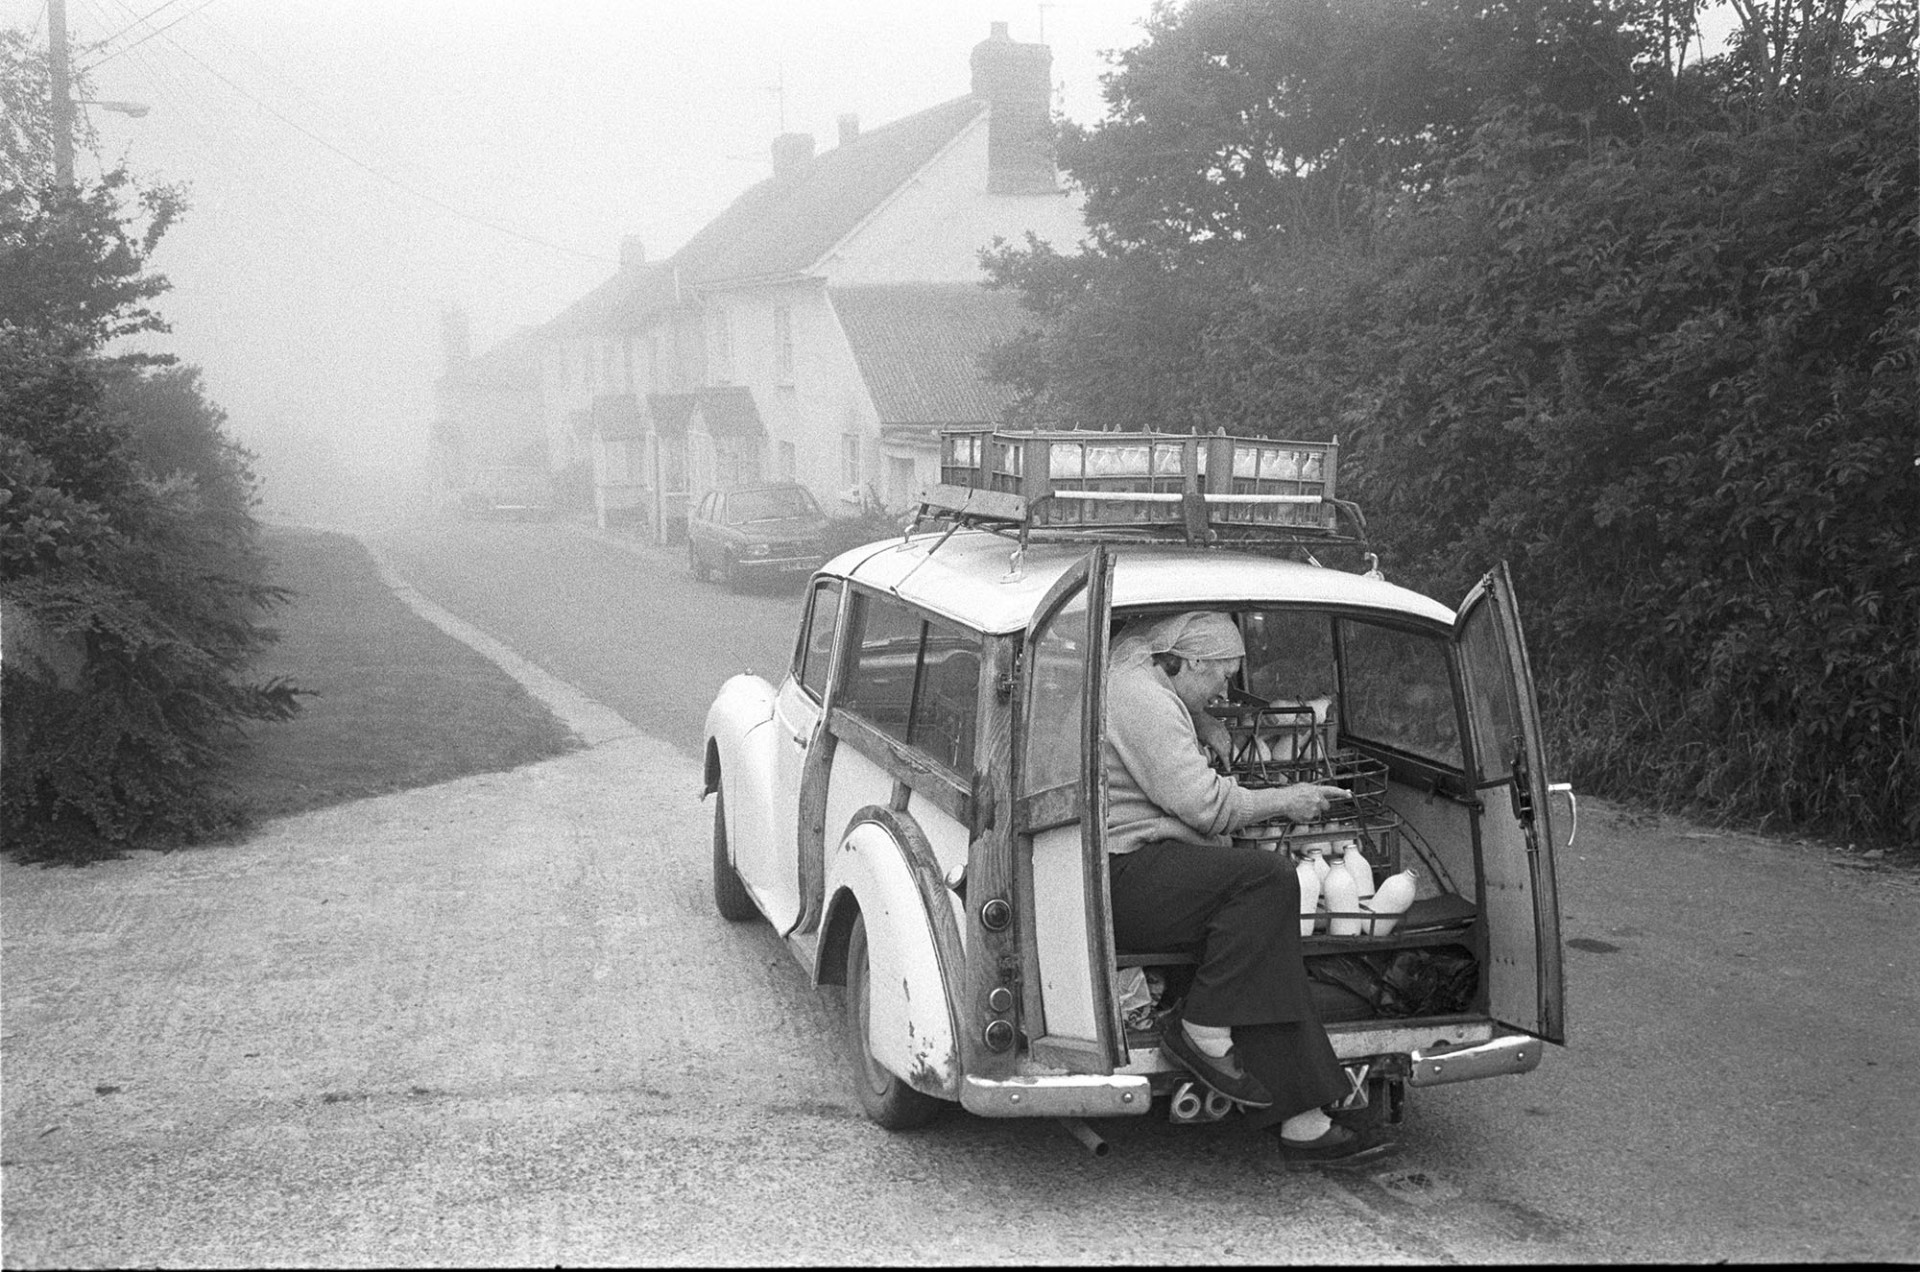 Woman checking milk deliveries in back of car in misty street. 
[Dorothy Hiscock checking milk bottles in the back of her car on her milk round in West lane, Dolton. There are more bottles secured to the roof of the car. The street is shrouded in mist.]